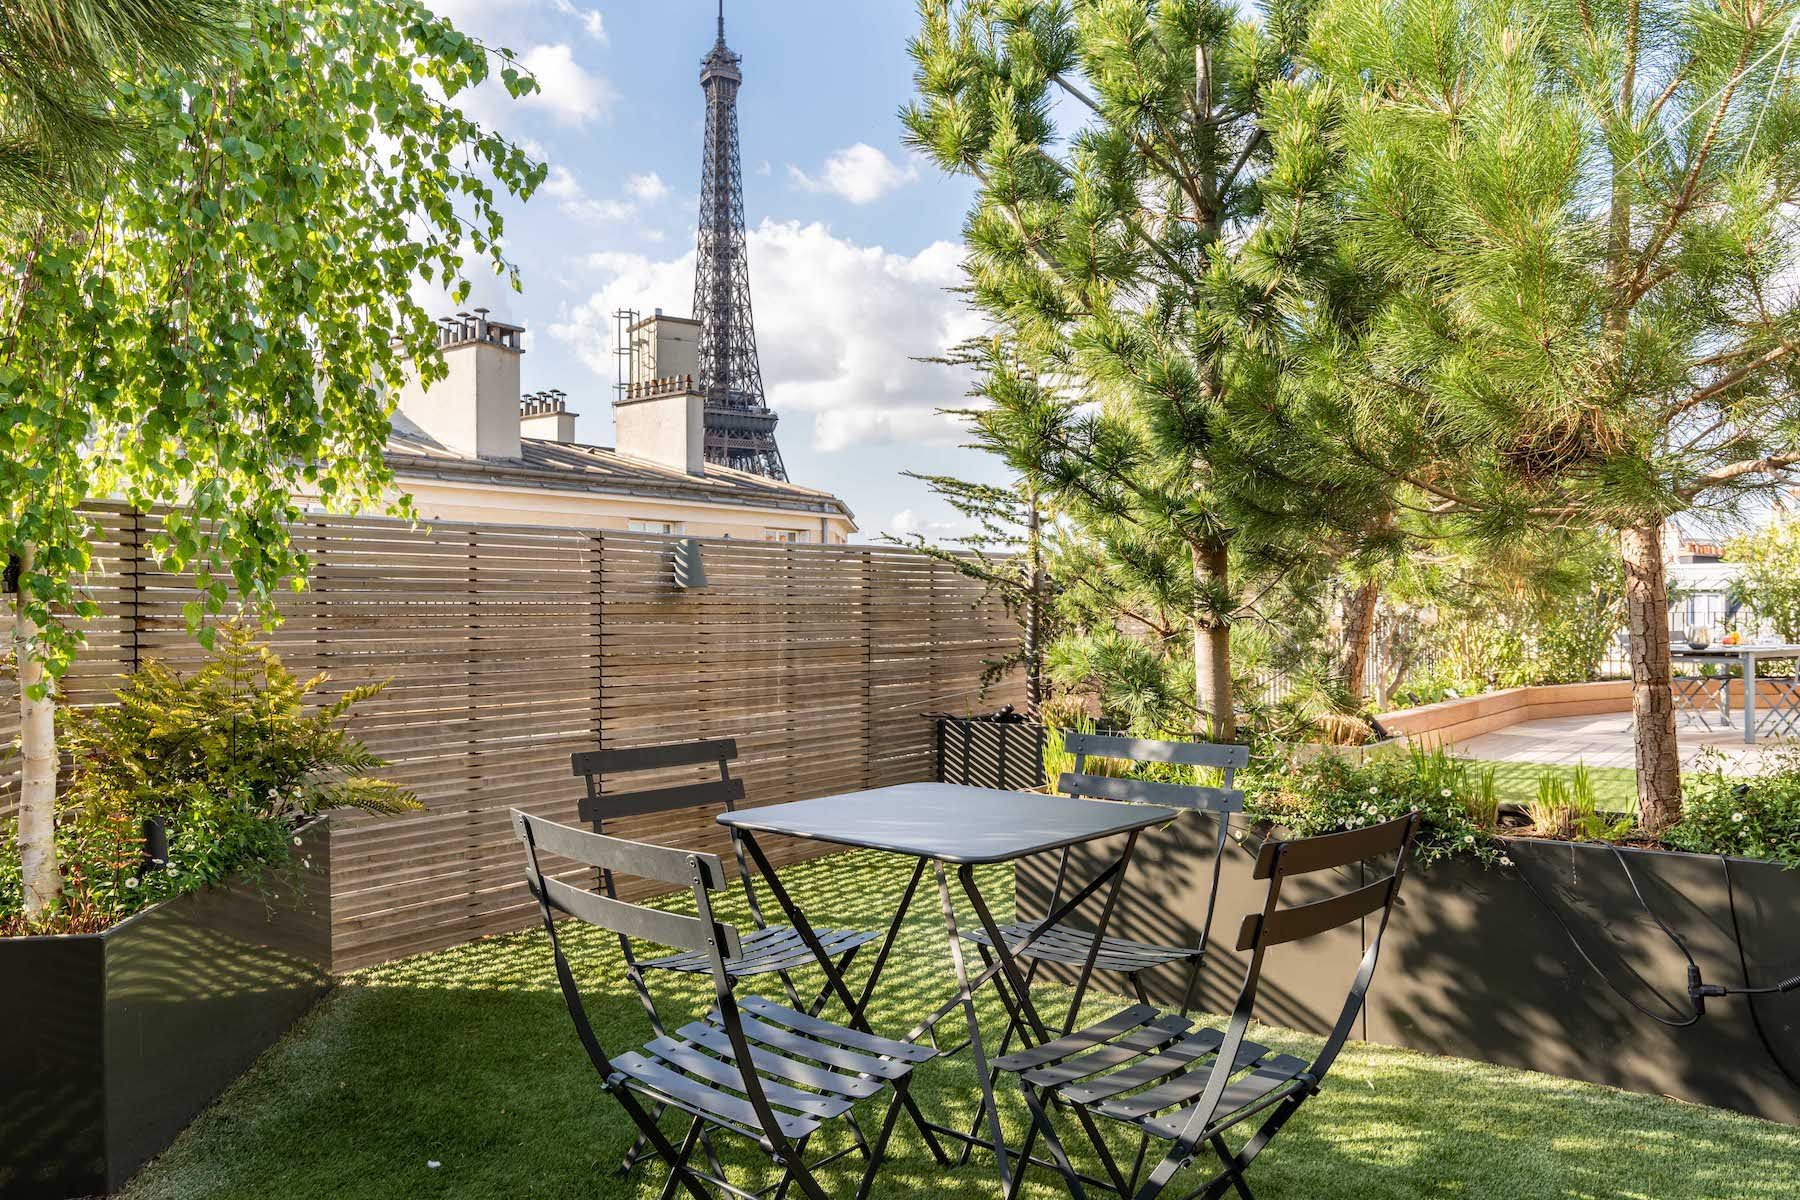 Exceptional rooftop apartment with Eiffel Tower view, in the heart of Paris and the 7th arrondissement 